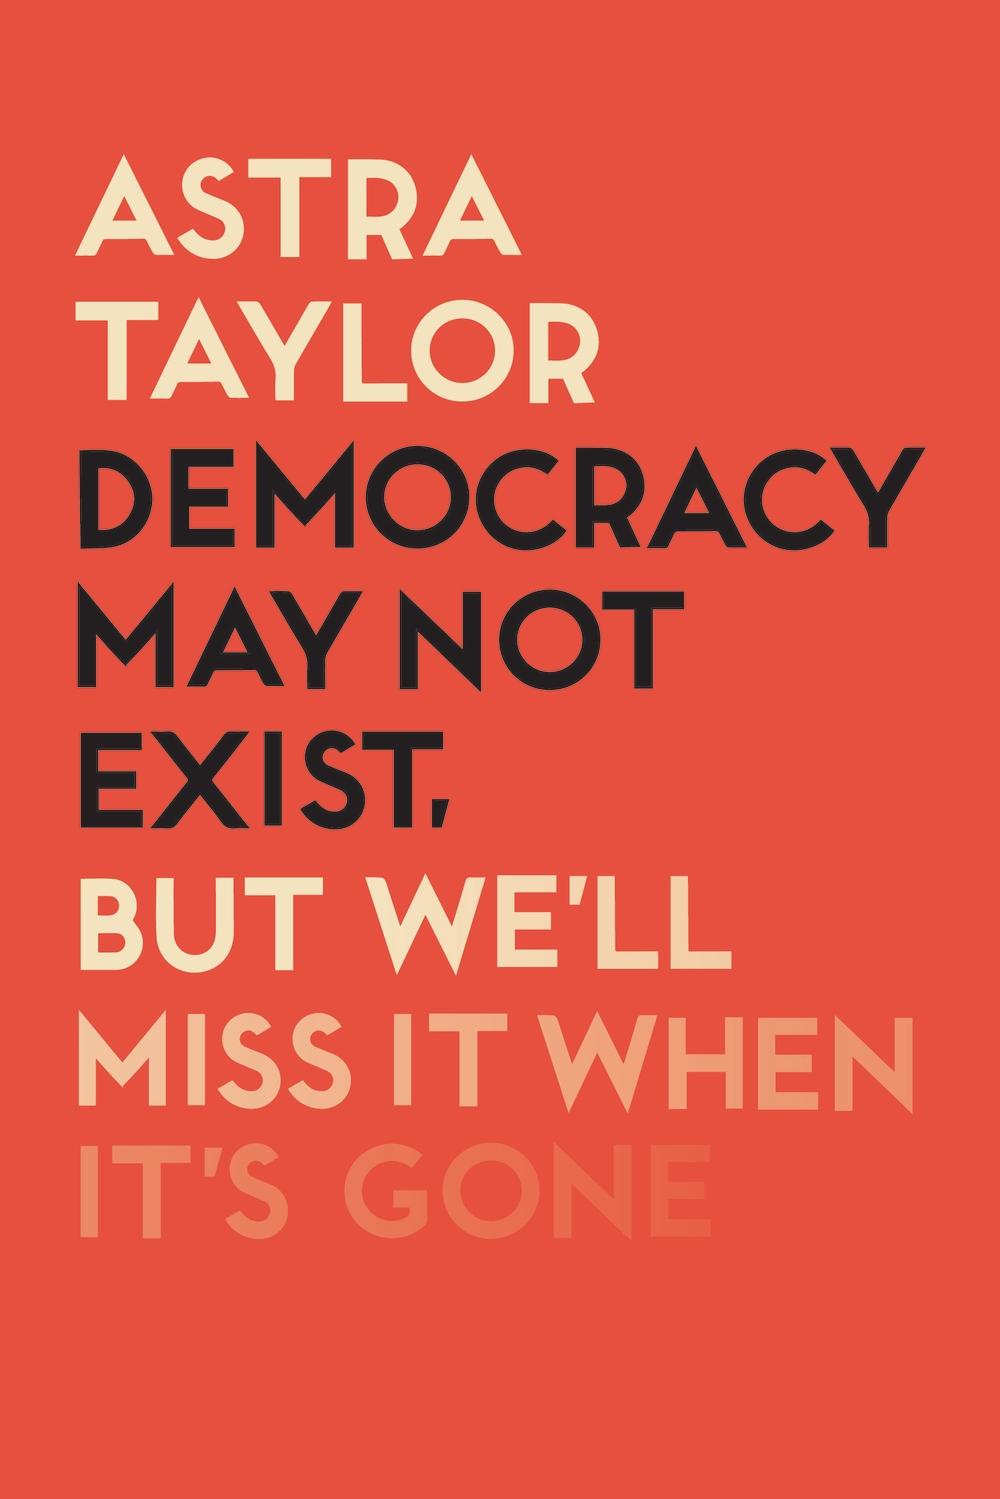 Democracy May Not Exist But We'll Miss it When It's Gone - Astra Taylor